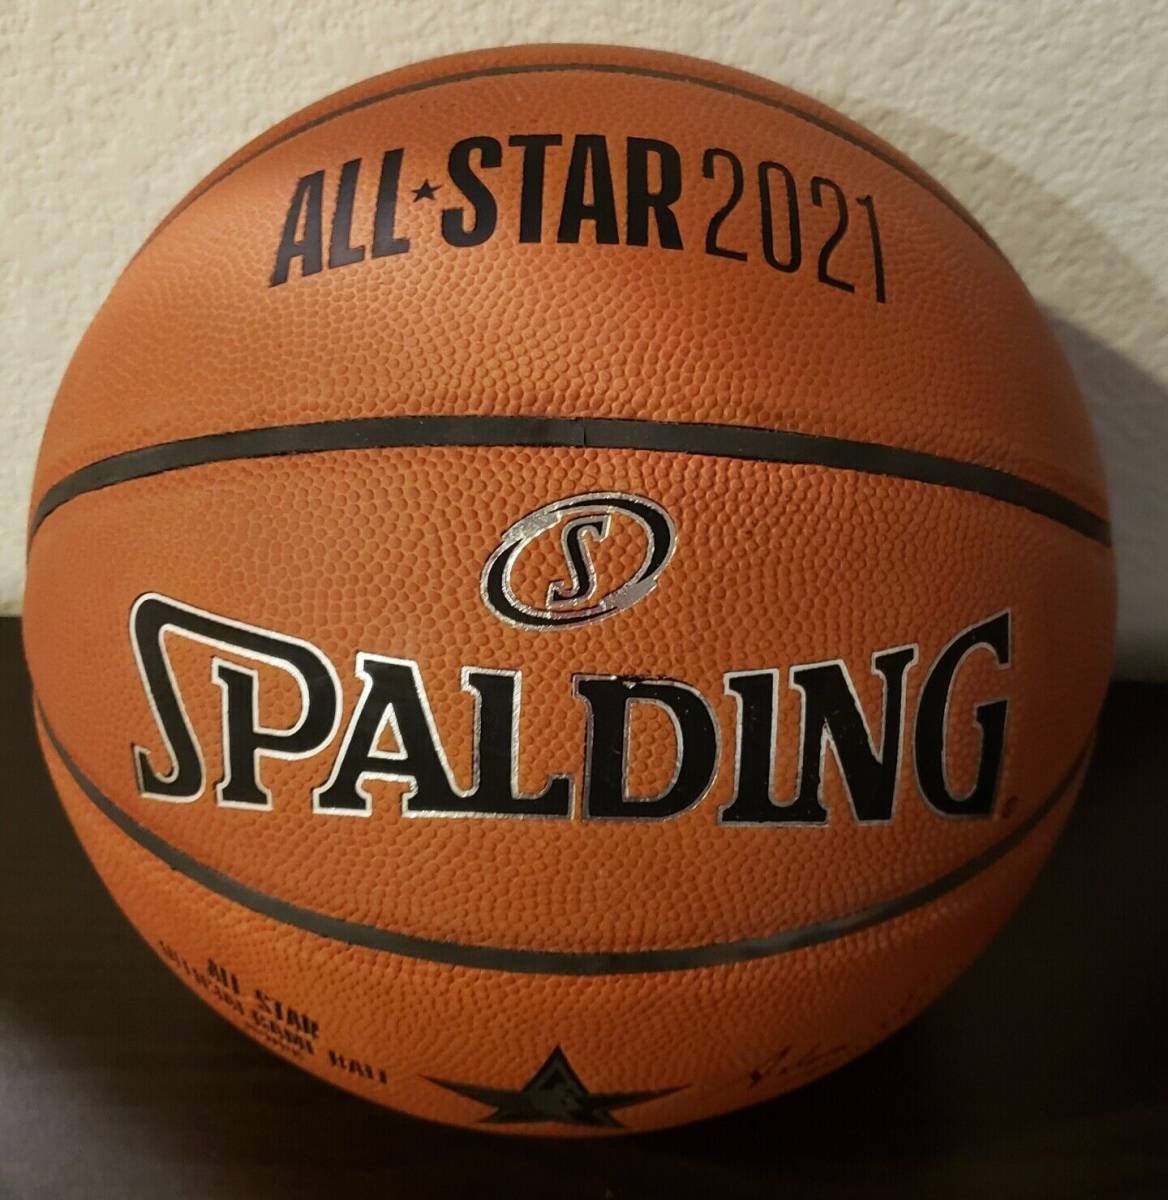 SPALDING 2021 NBA All-Star Game Official Spalding Game Basketball 海外 即決